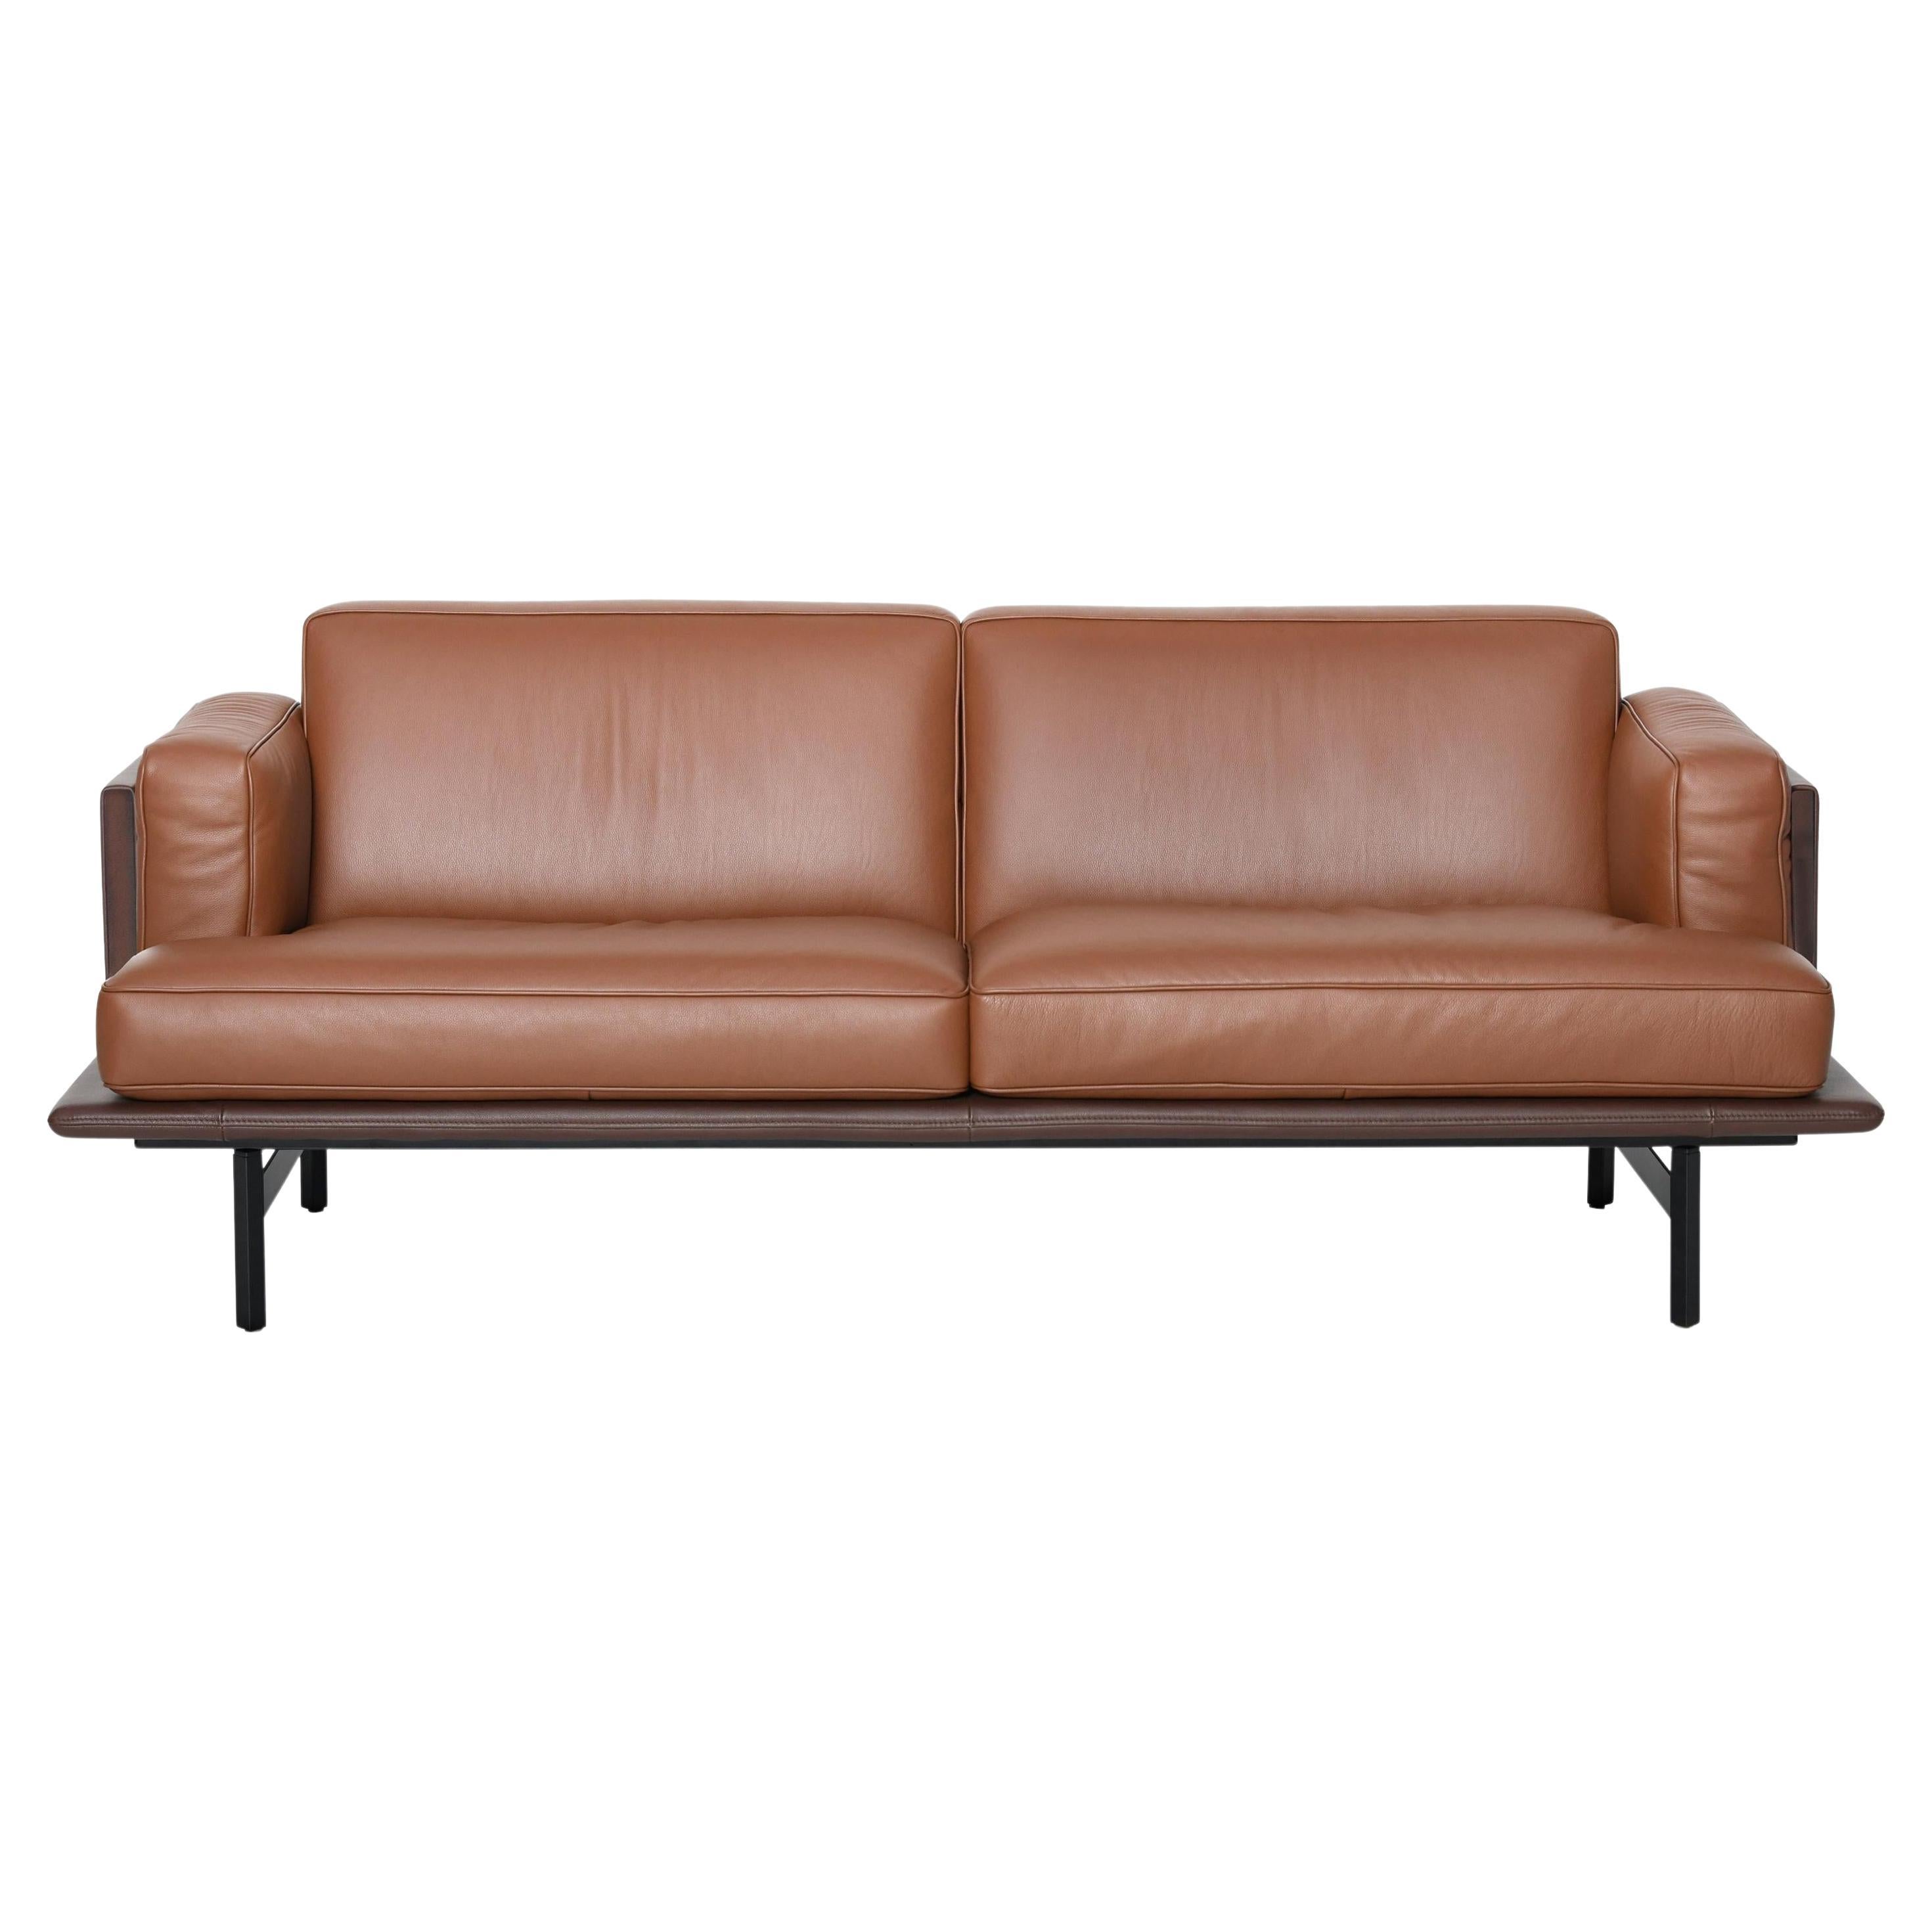 De Sede DS-175 Medium Two-Seat Sofa in Hazel Upholstery by Patrick Norguet For Sale